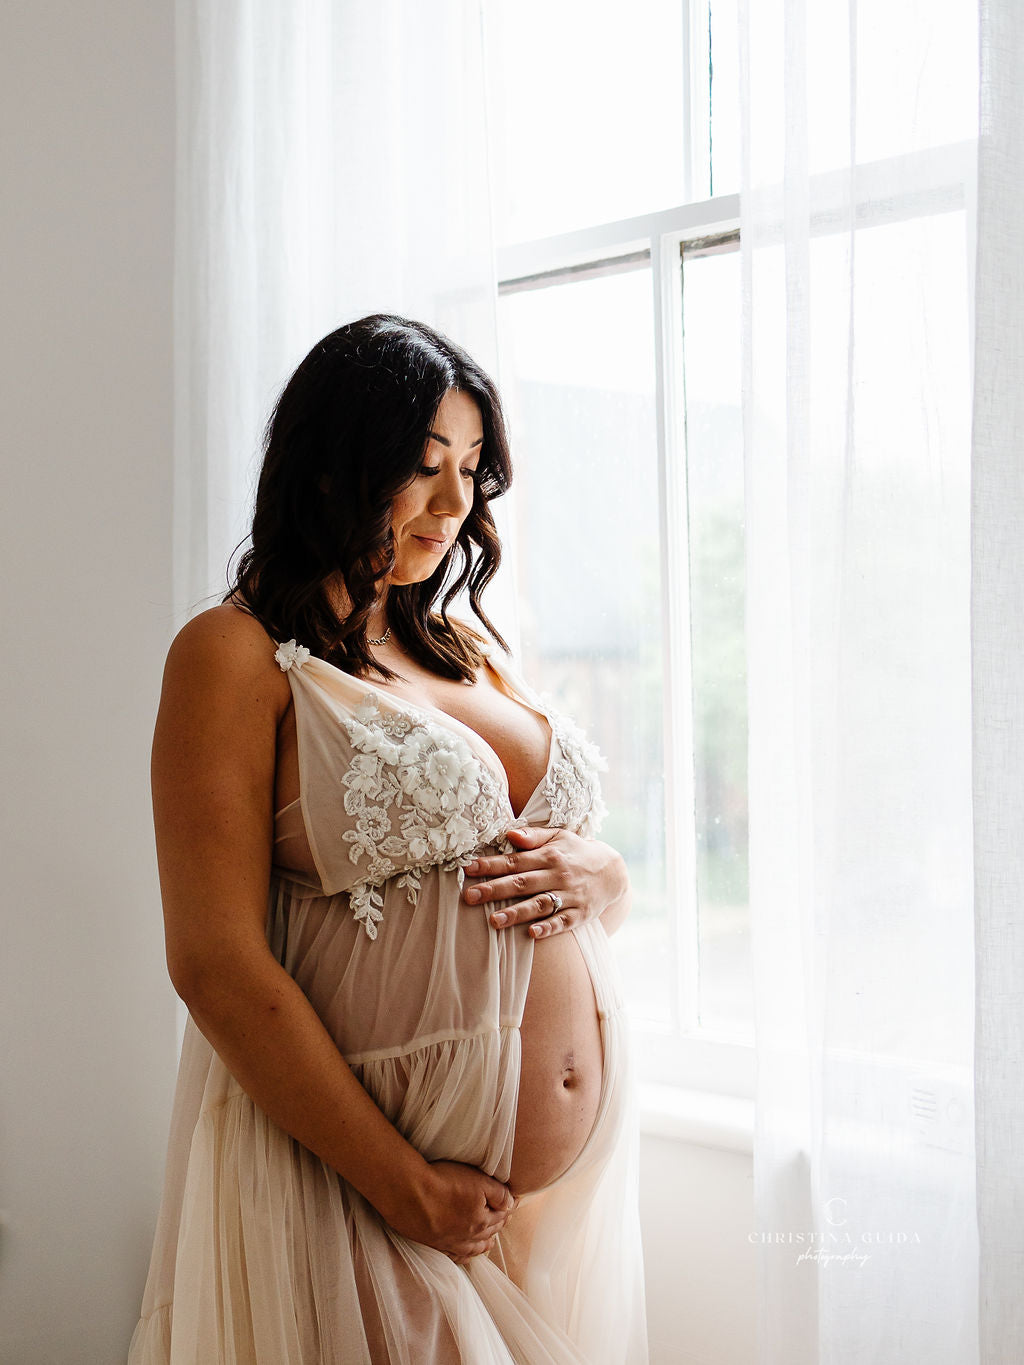 Ivory Wisteria Gown - maternity photoshoot dress